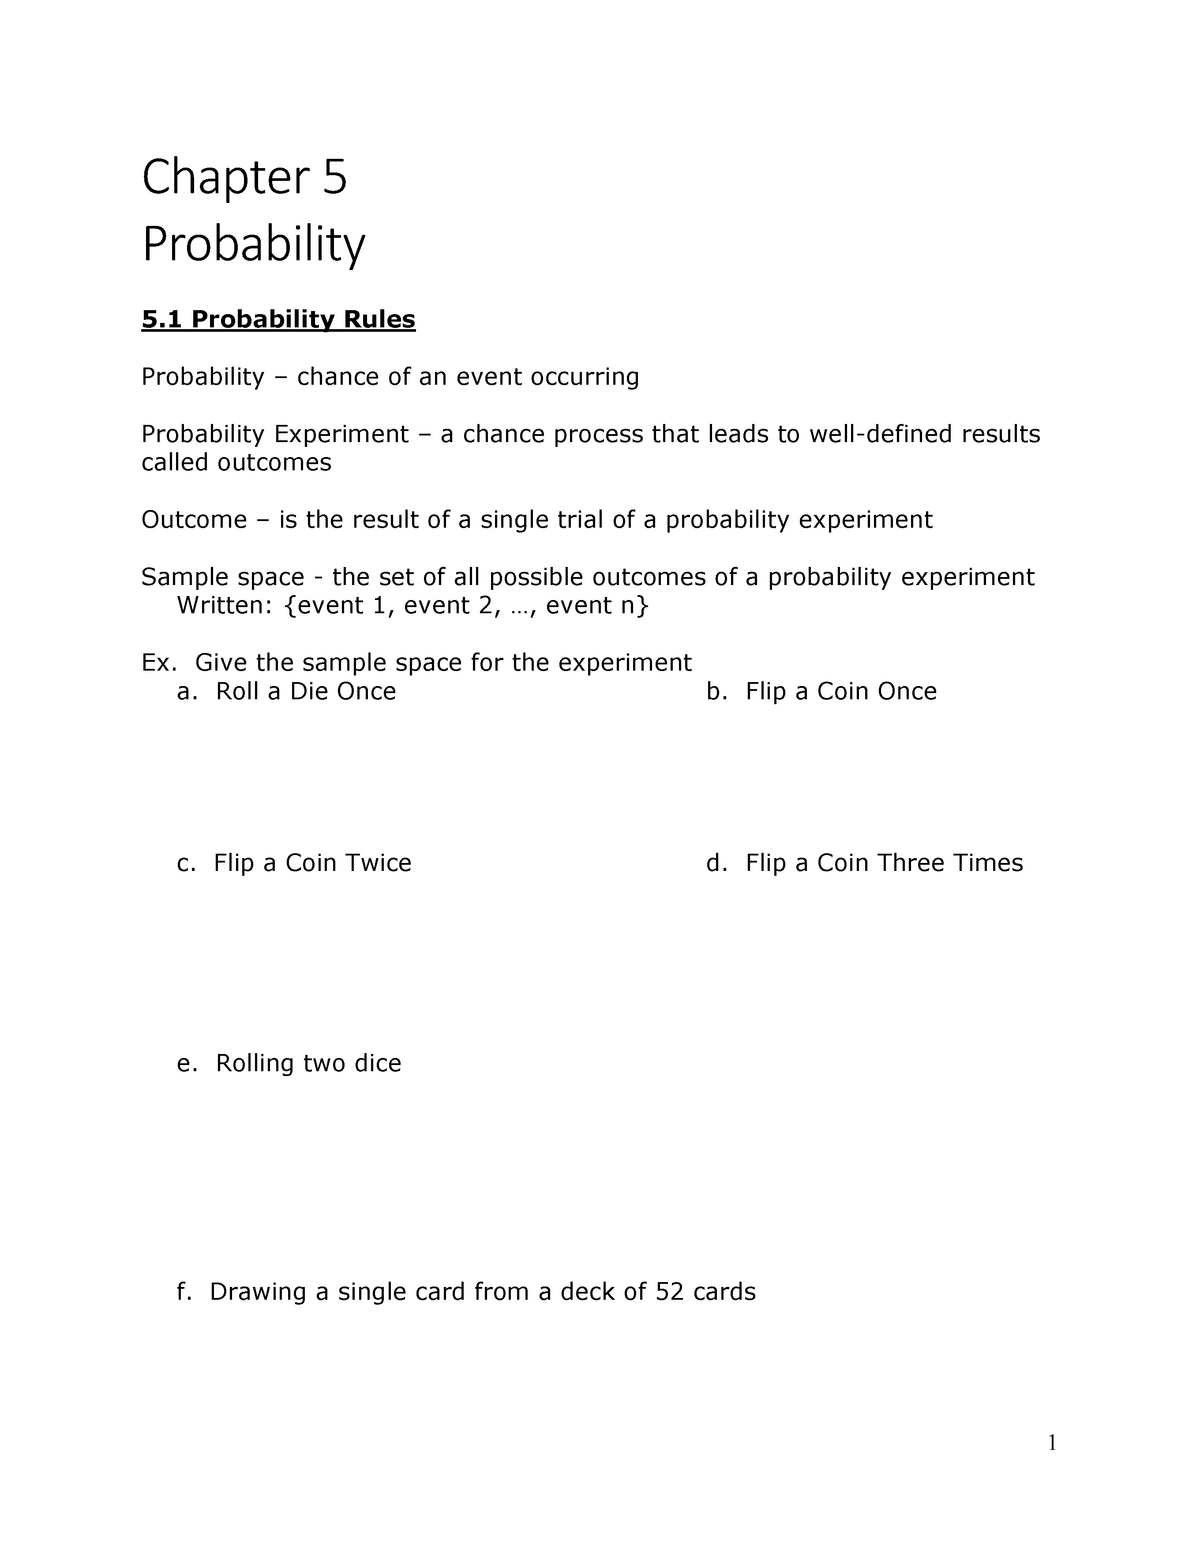 Probability Rules Worksheet Answers